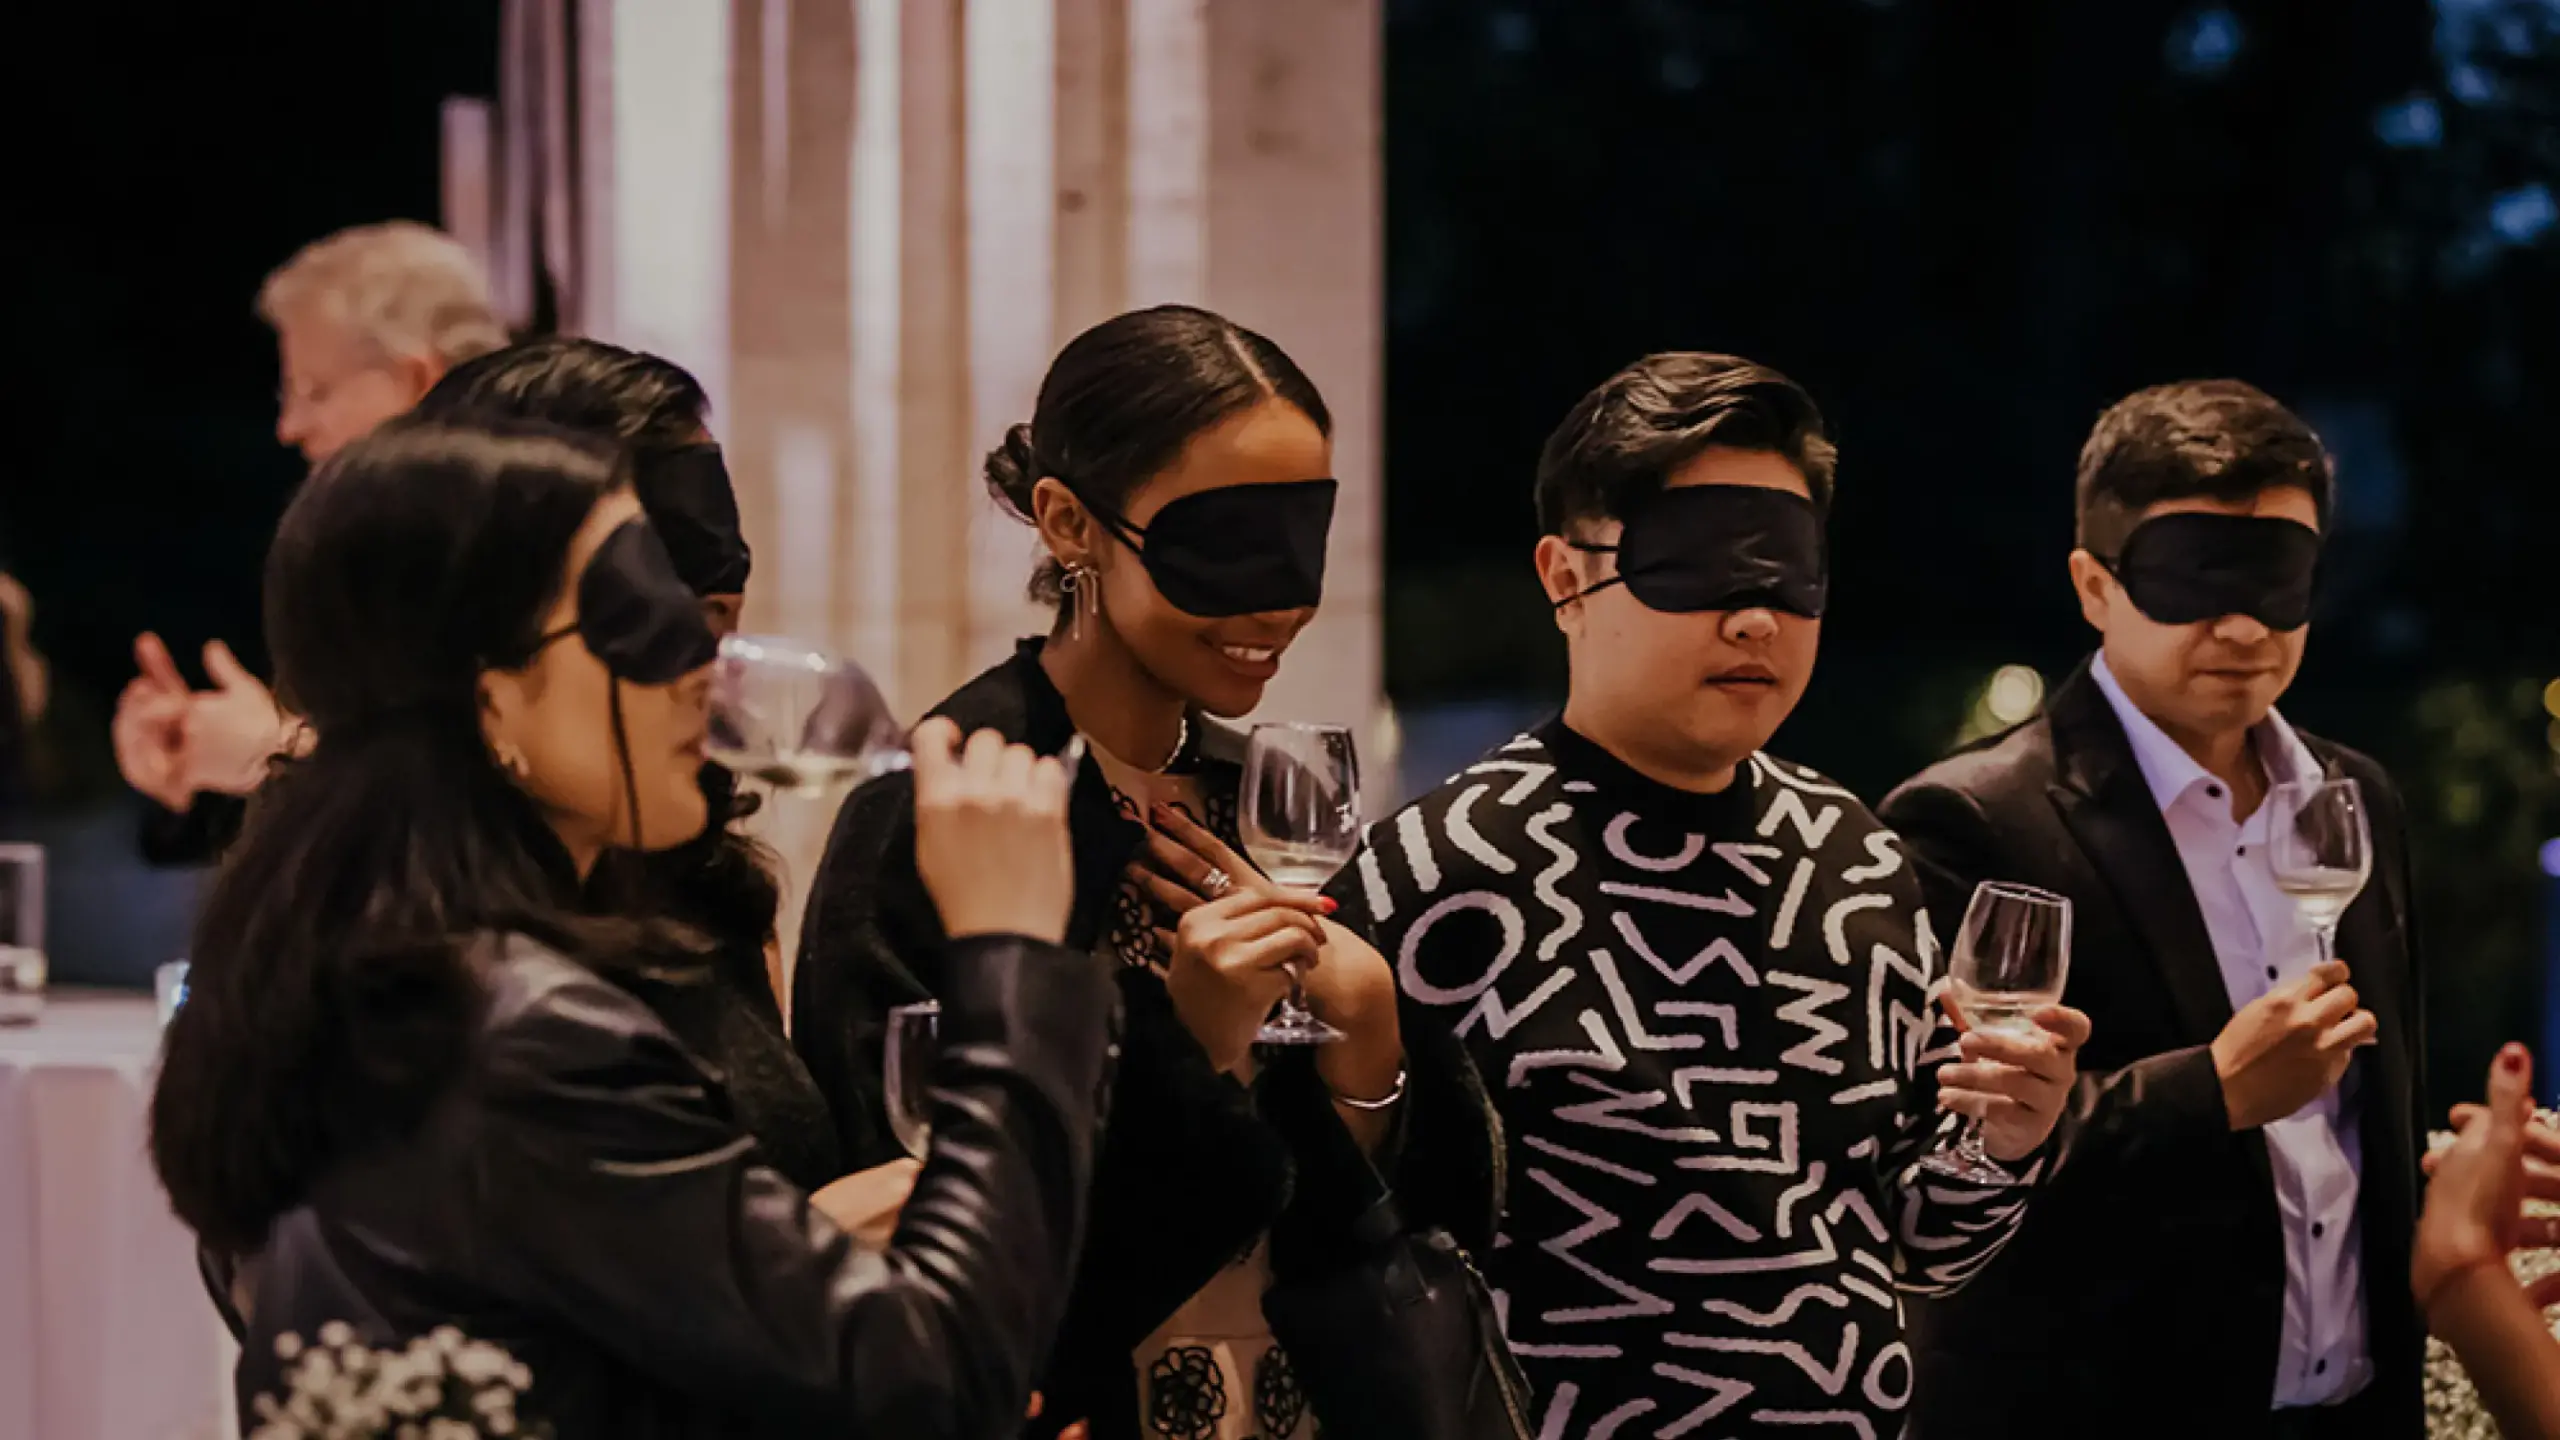 A group of people wearing black blindfolds stands together, smiling and holding wine glasses. They appear to be at a social event, engaging in what might be a sensory wine-tasting experience. The background is dimly lit with pillars and ambient lighting visible.